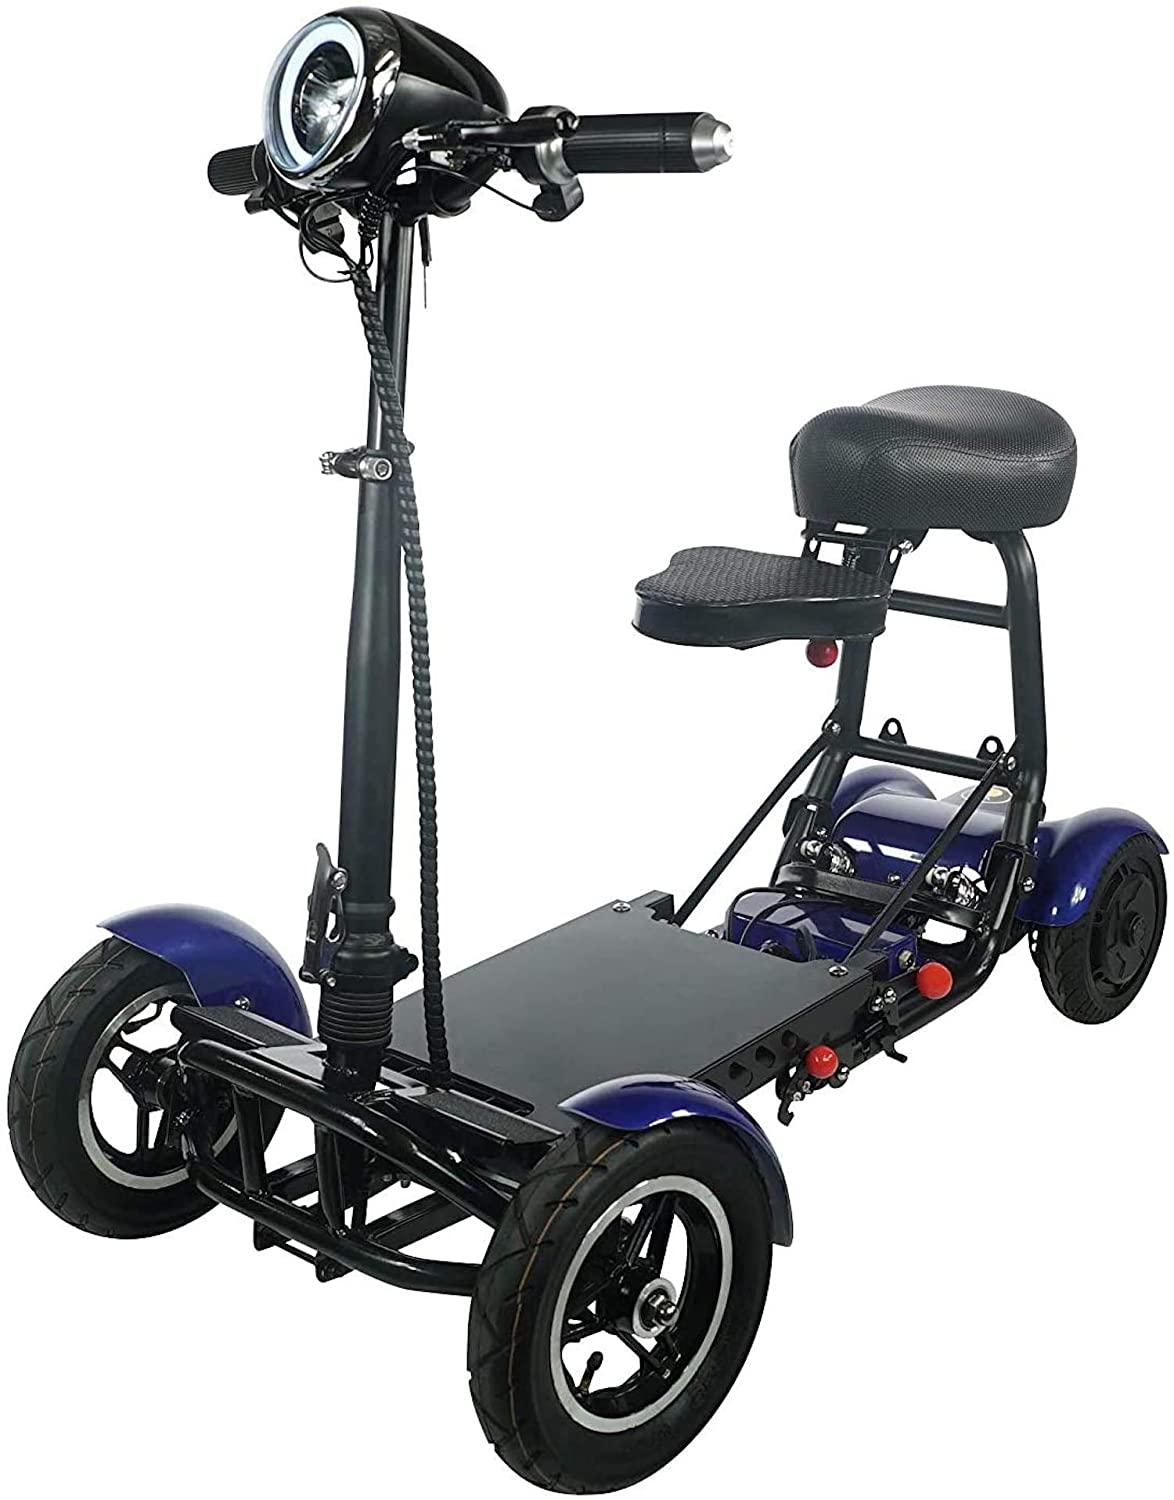 Top 10 Best Portable Mobility Scooter Reviews - Brand Review